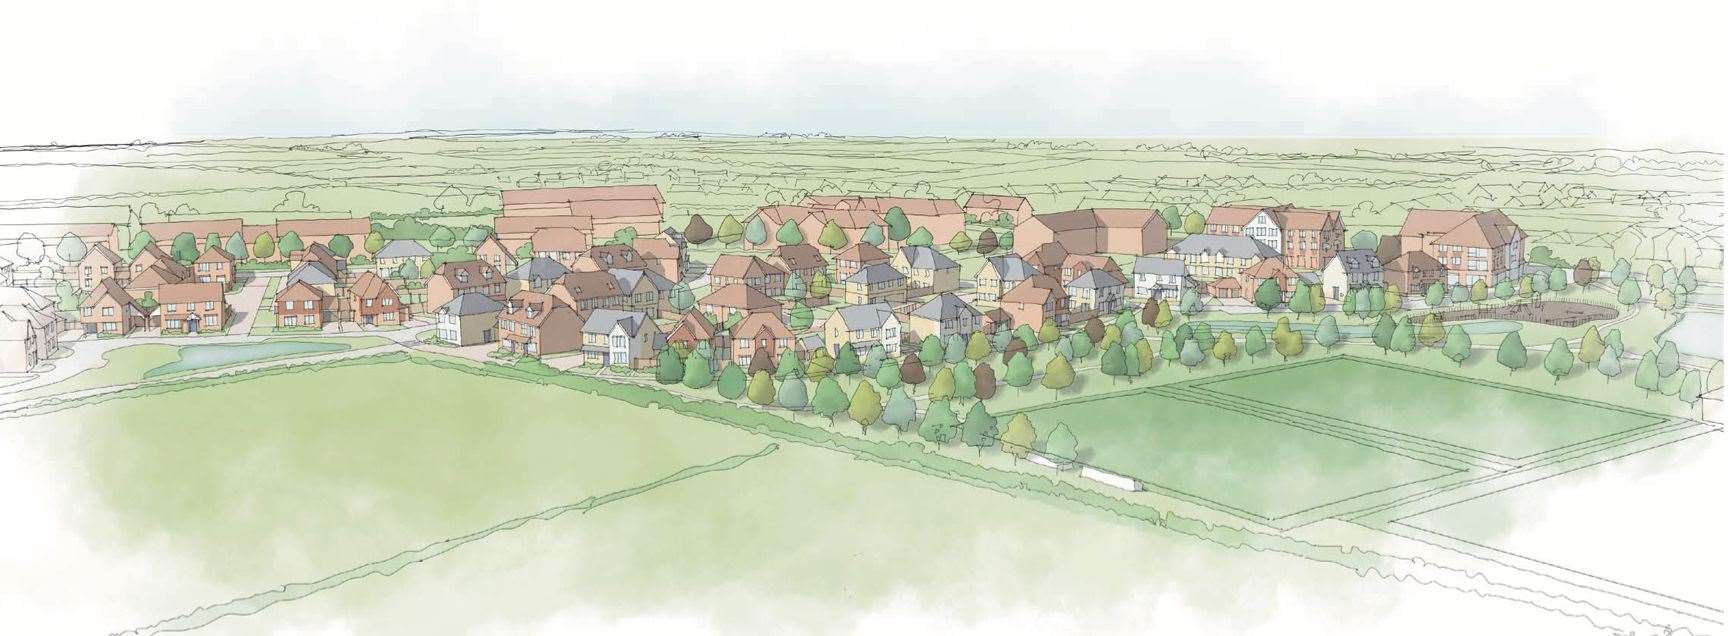 The 154-house estate has been given the green light by Swale Borough Council